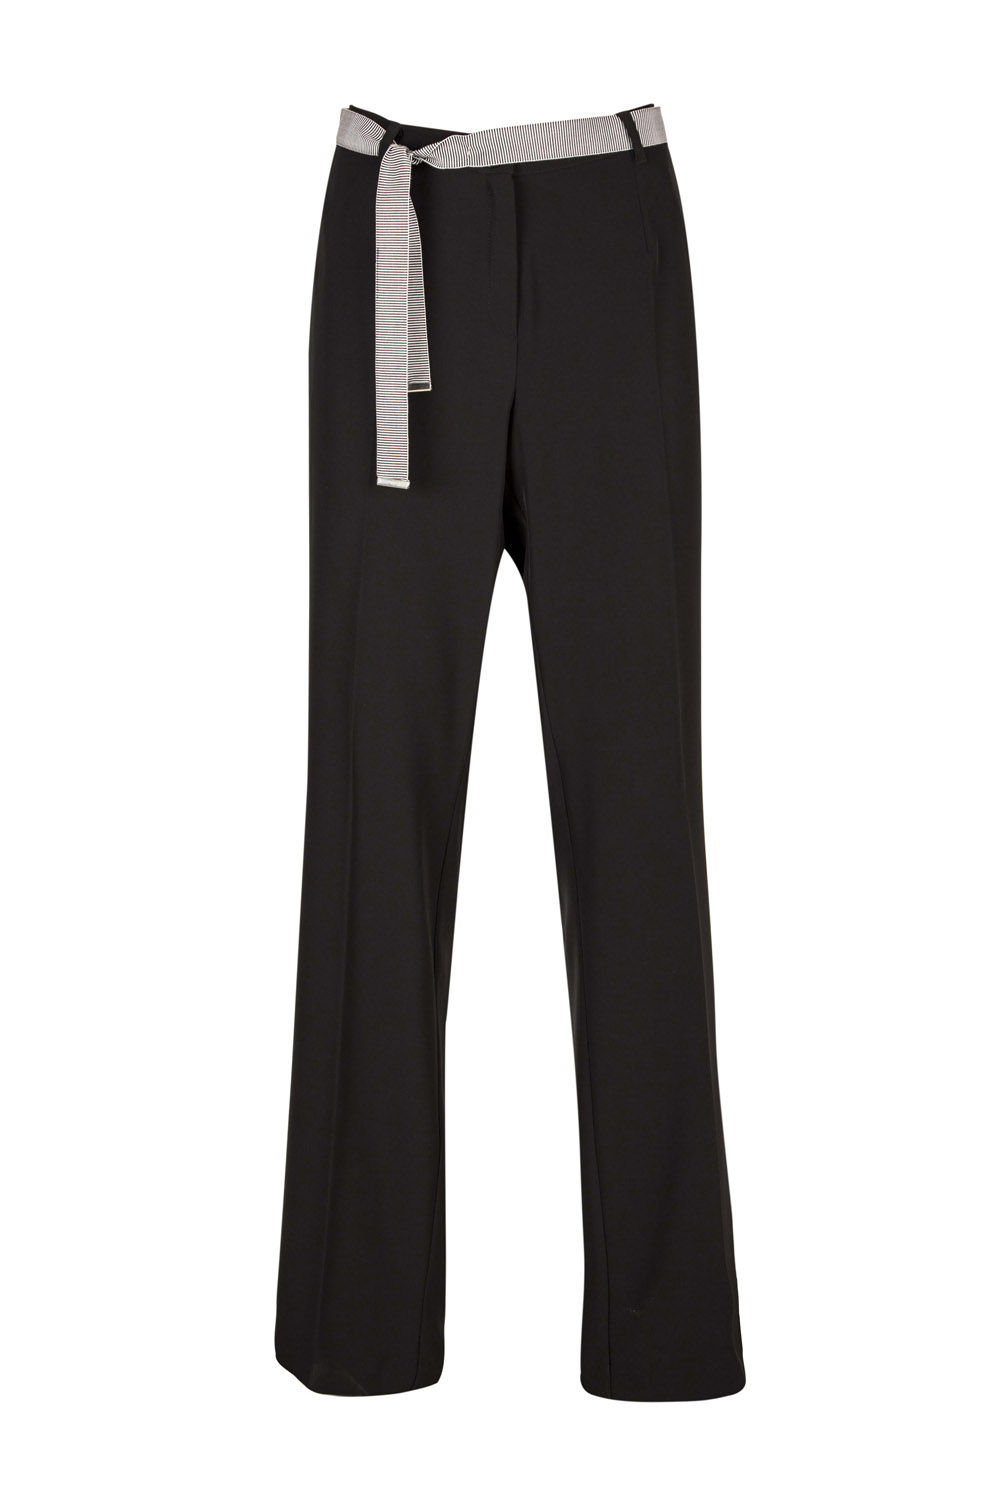 Soft Trousers with Elasticated  Back Waistband and Matching Belt